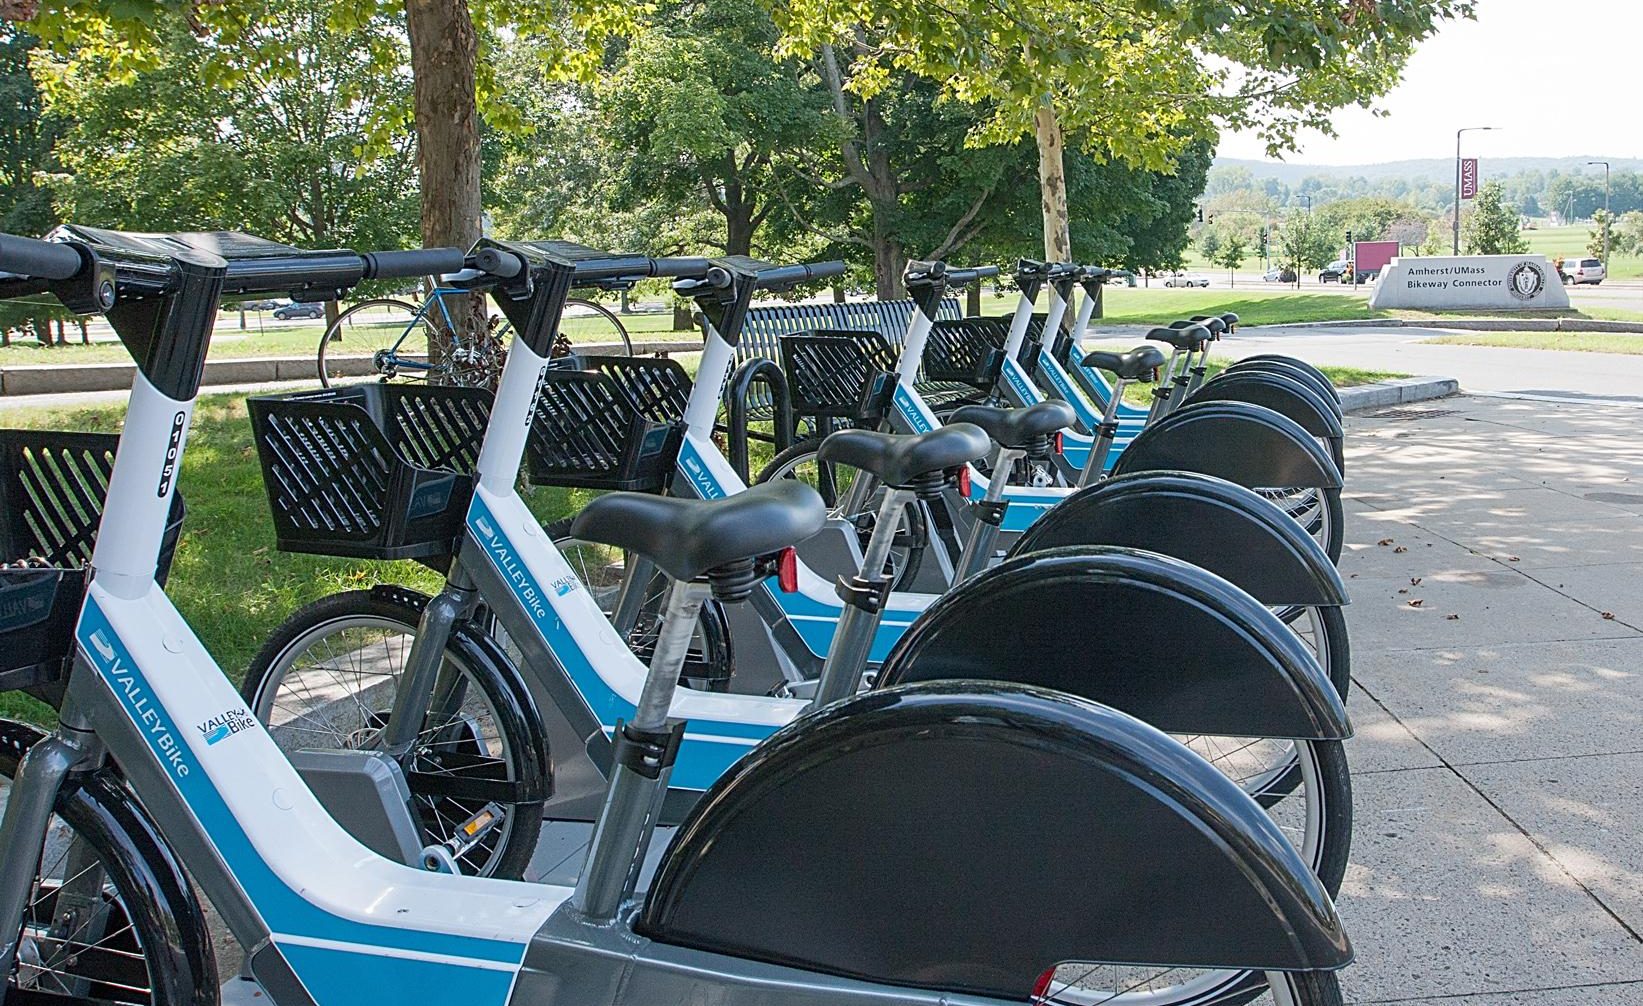 A row of docked blue, white, and black ValleyBike shared bikes parked along a paved street under the shade of some leafy trees.